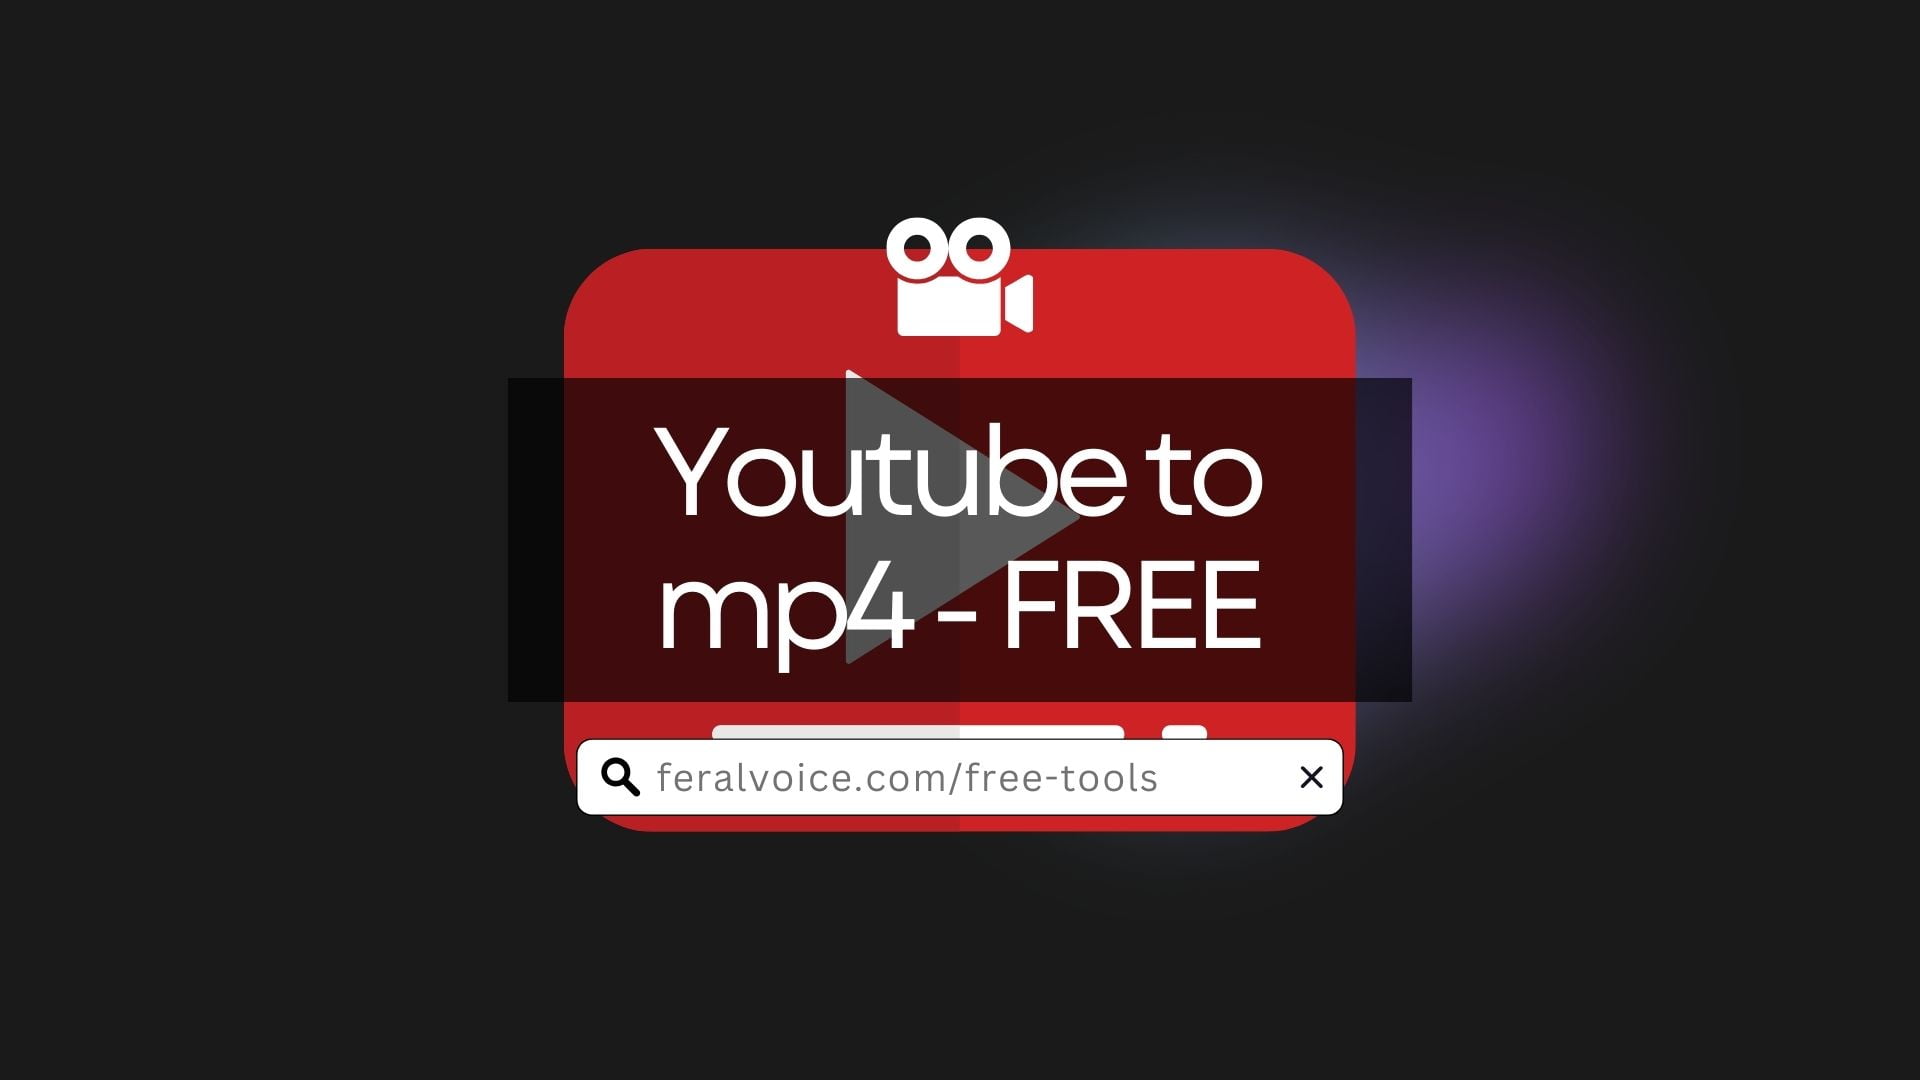 Youtube to mp4 converter | Download Youtube Videos